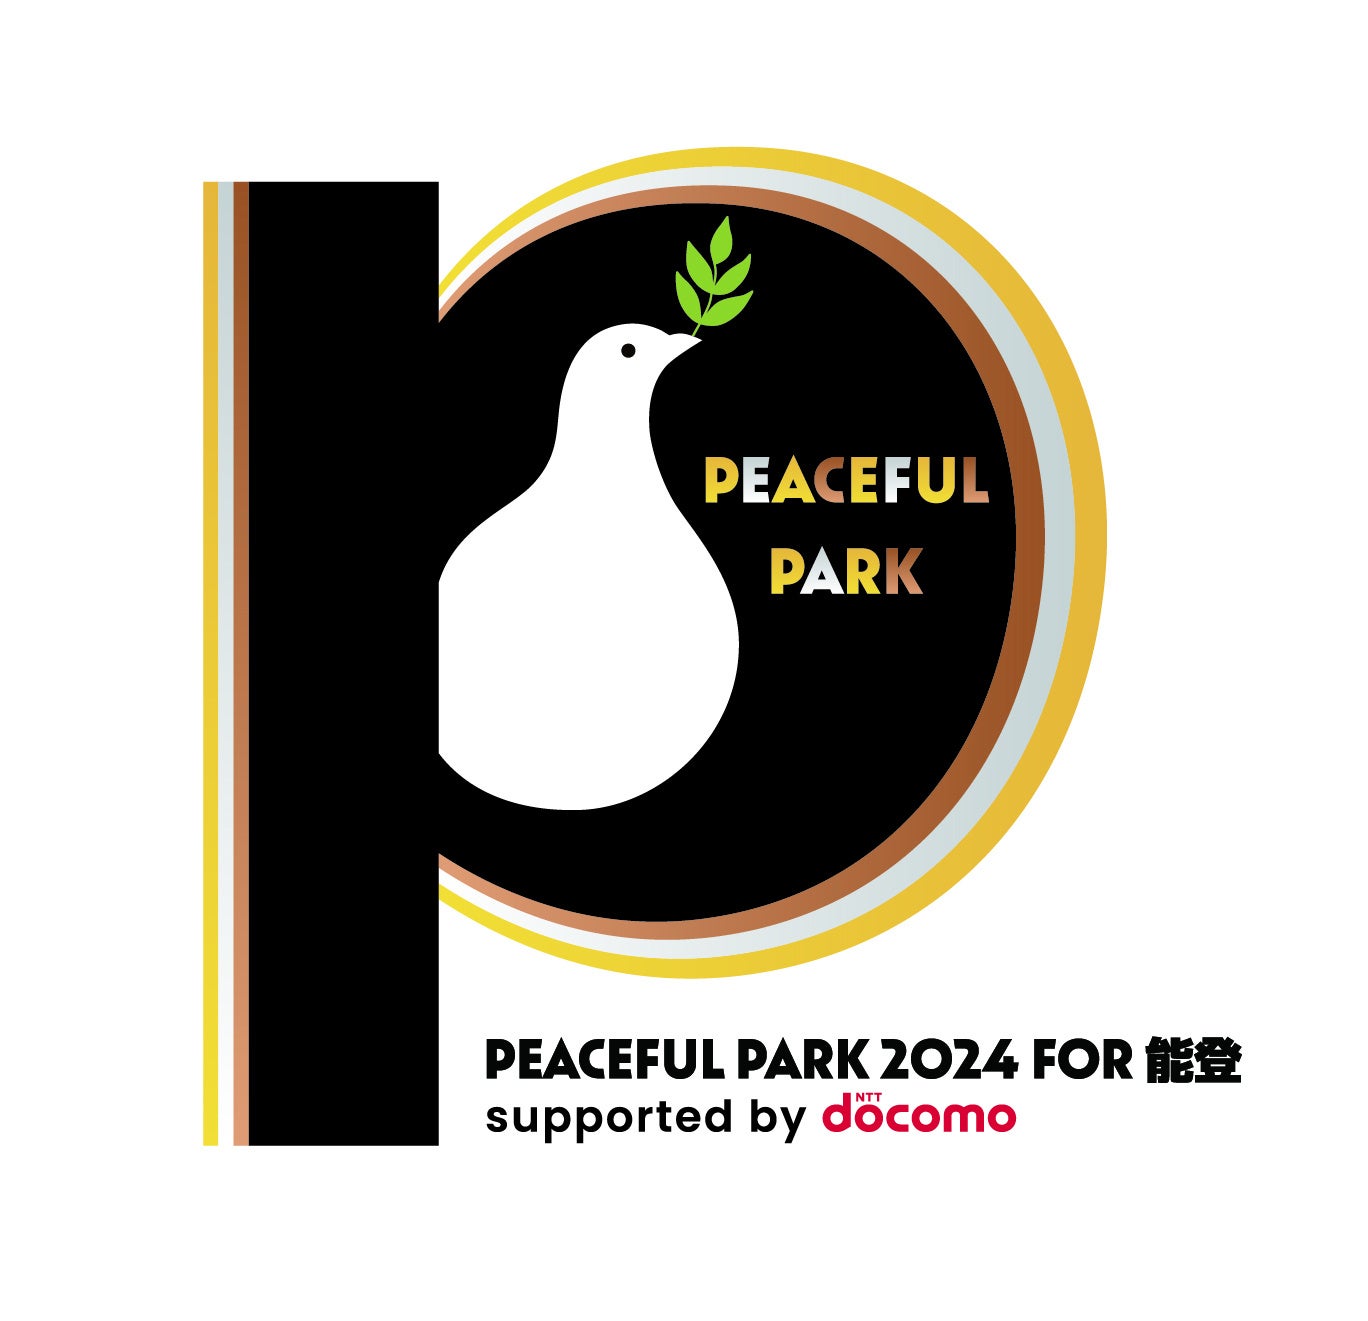 「PEACEFUL PARK 2024 for 能登 -supported by NTT docomo-」にGLAY、美 少年、氣志團、FRUITS ZIPPERの出演が決定！